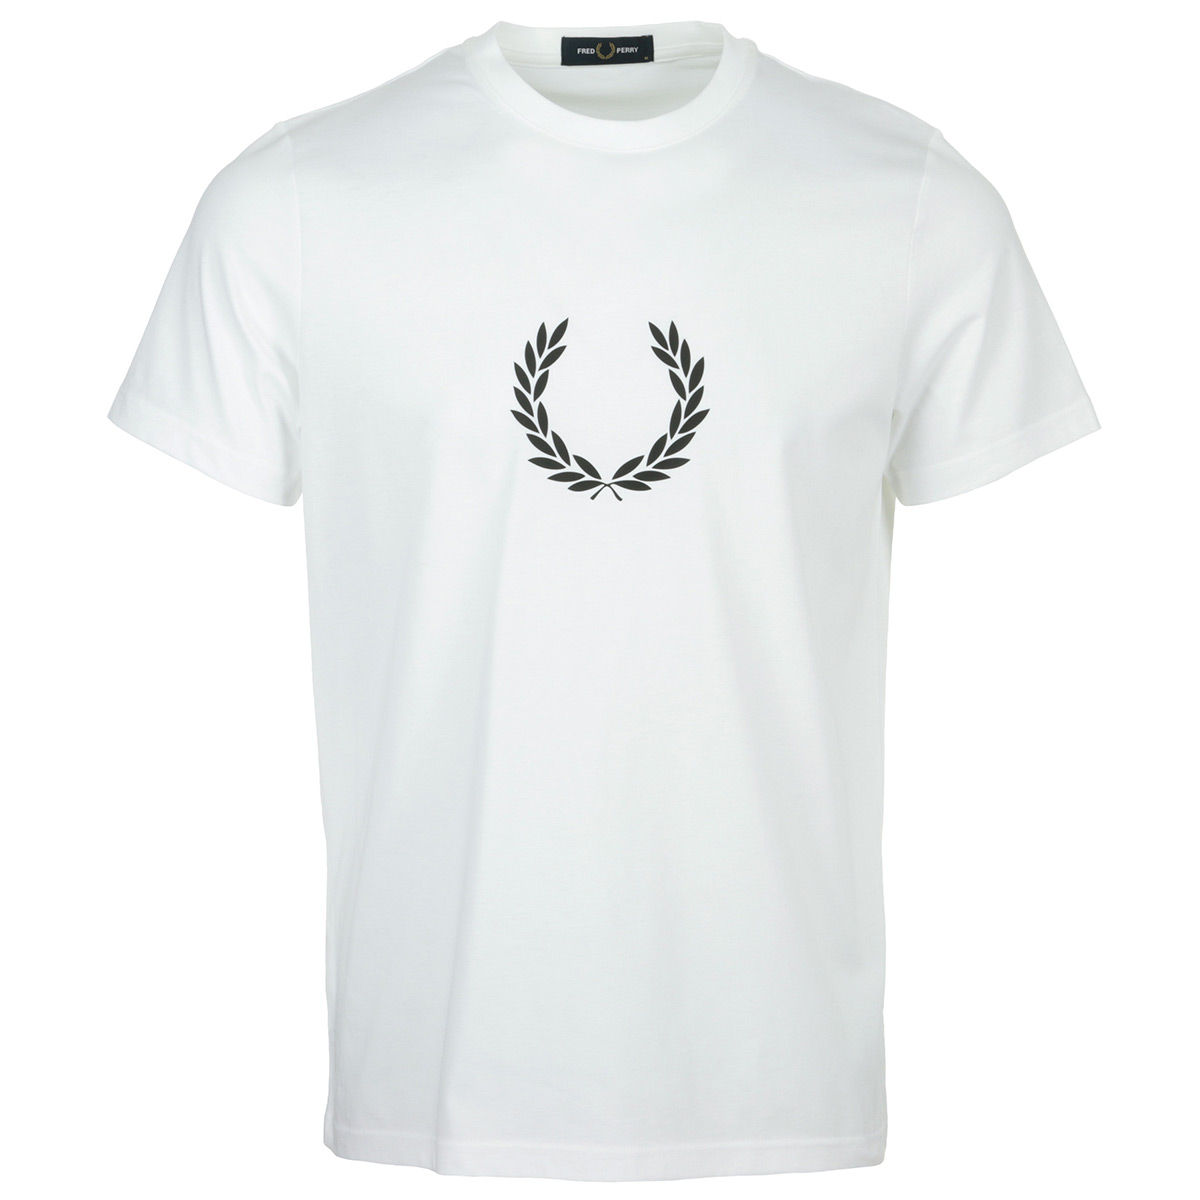 Fred Perry Laurel Wreath Graphic T-Shirt